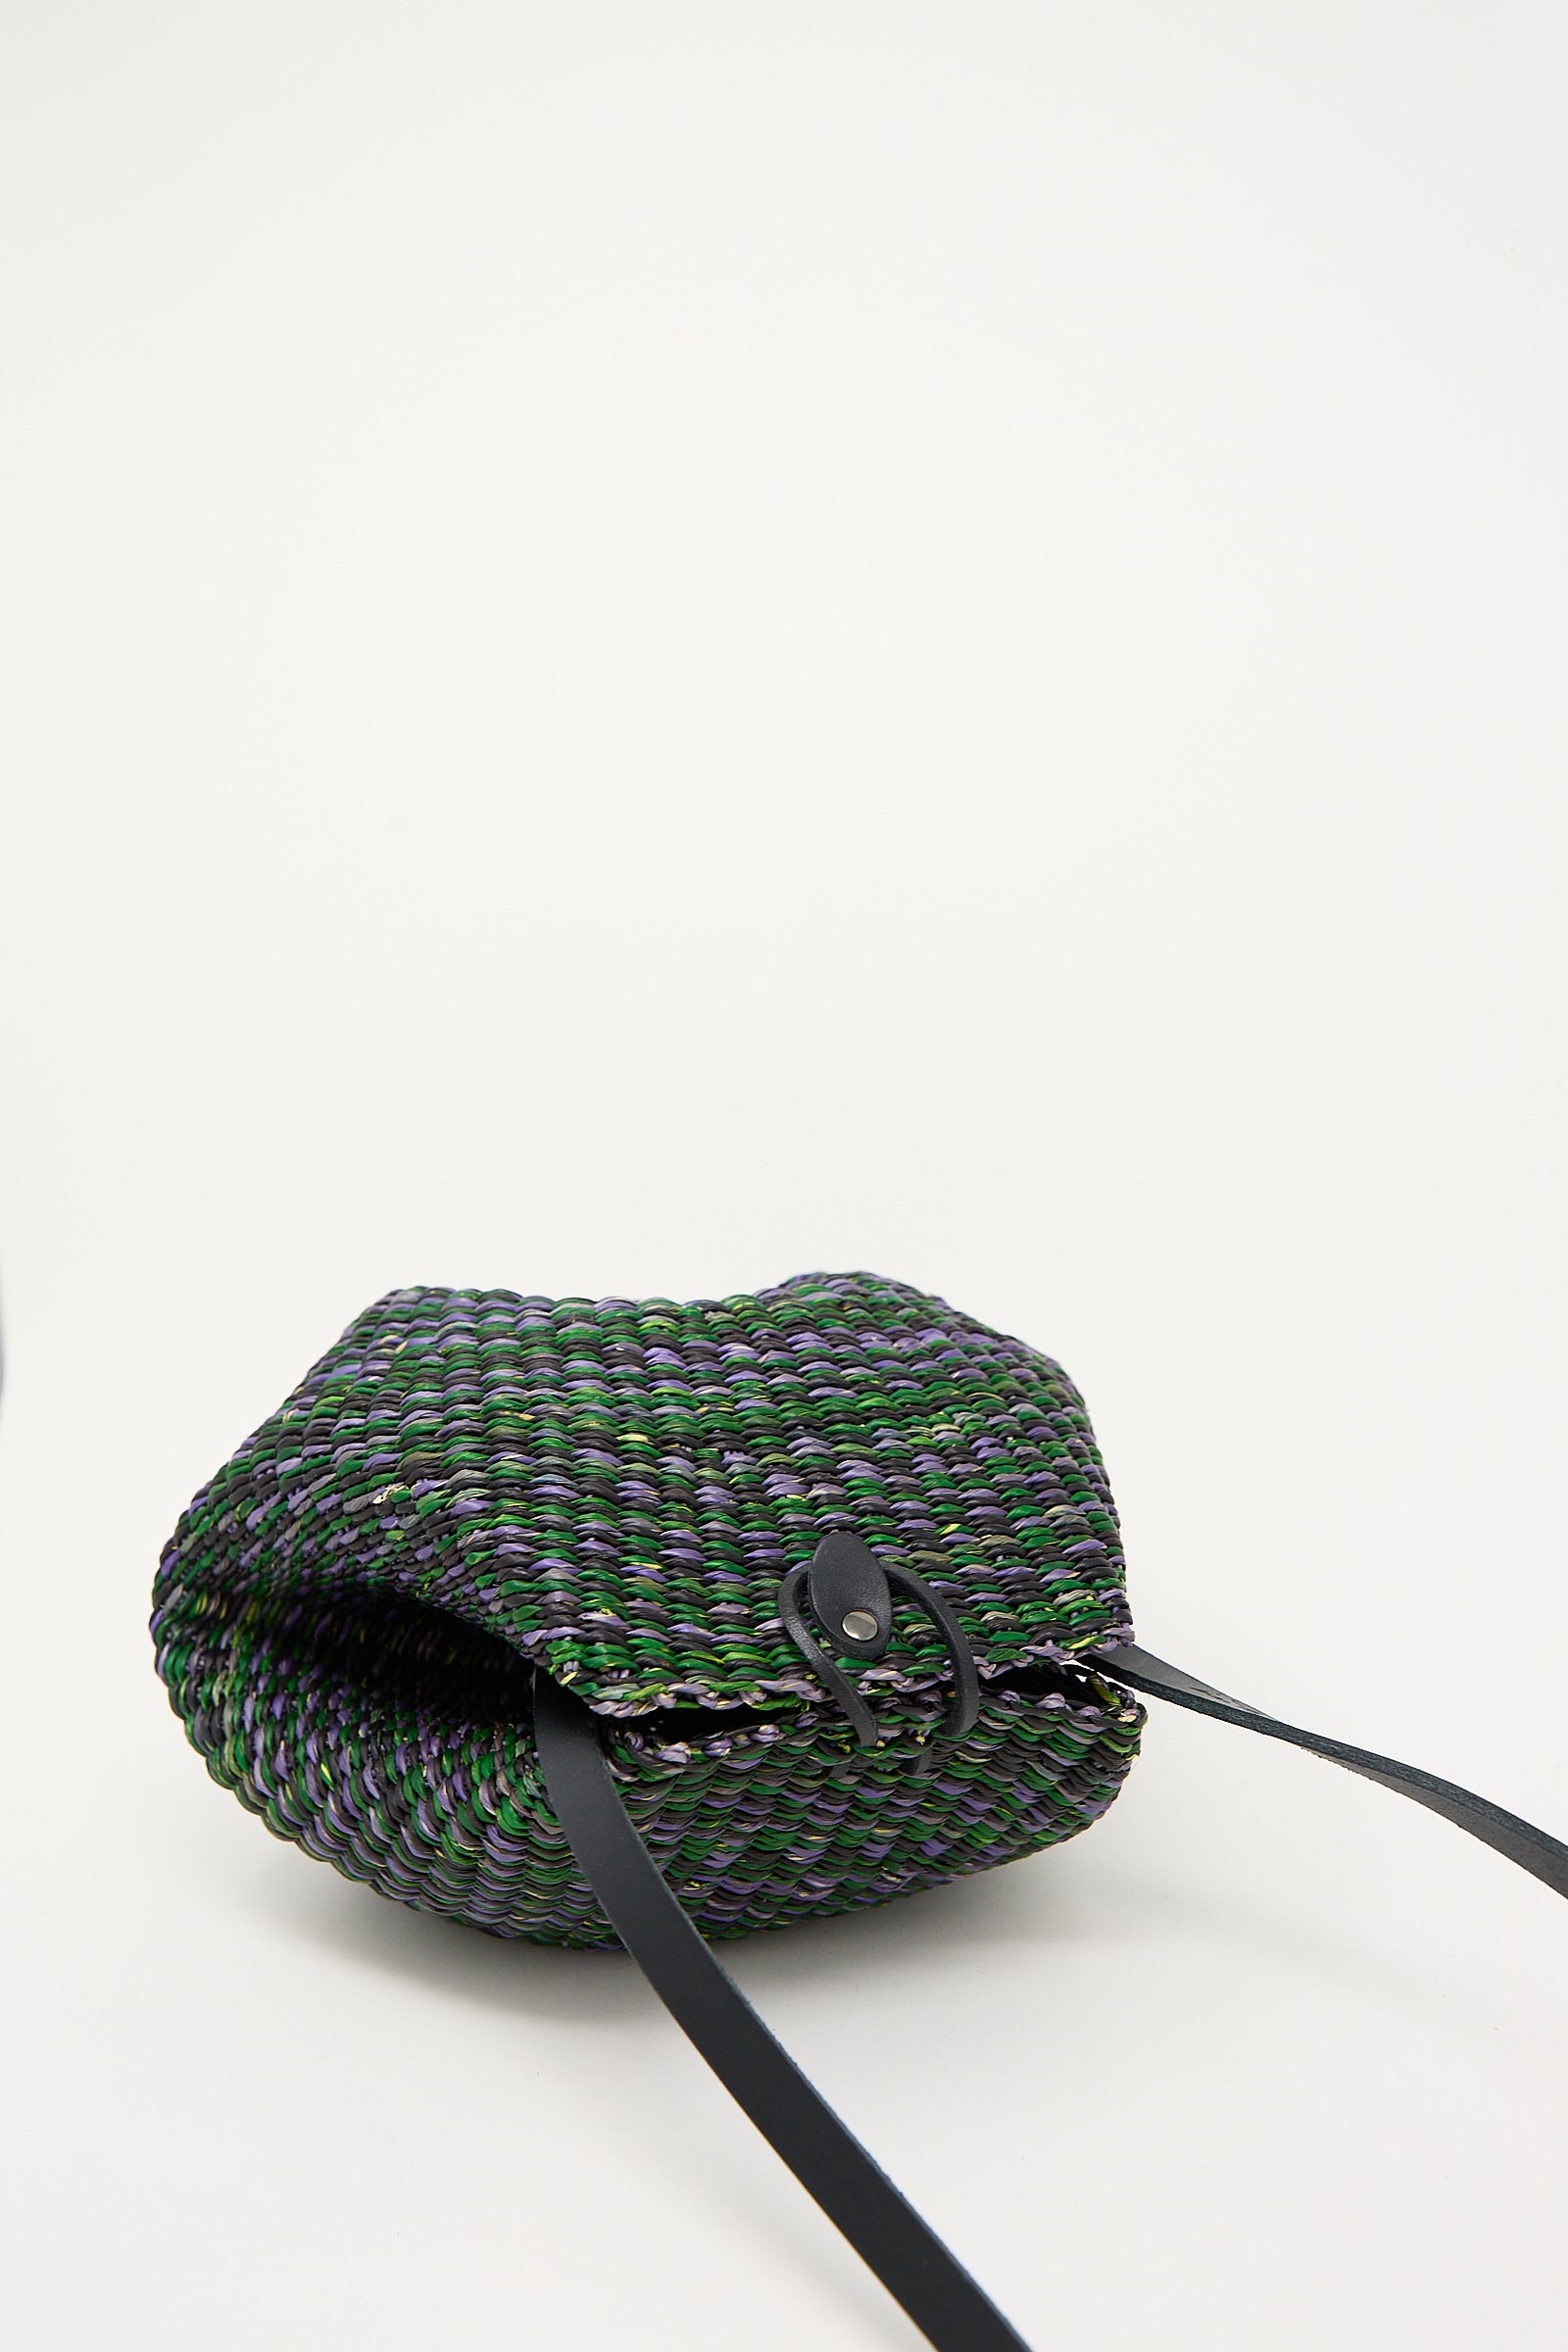 Woven N. 14 Mini Shell Bag in Green vegetable-tanned leather shoulder bag on a white background by Inès Bressand.